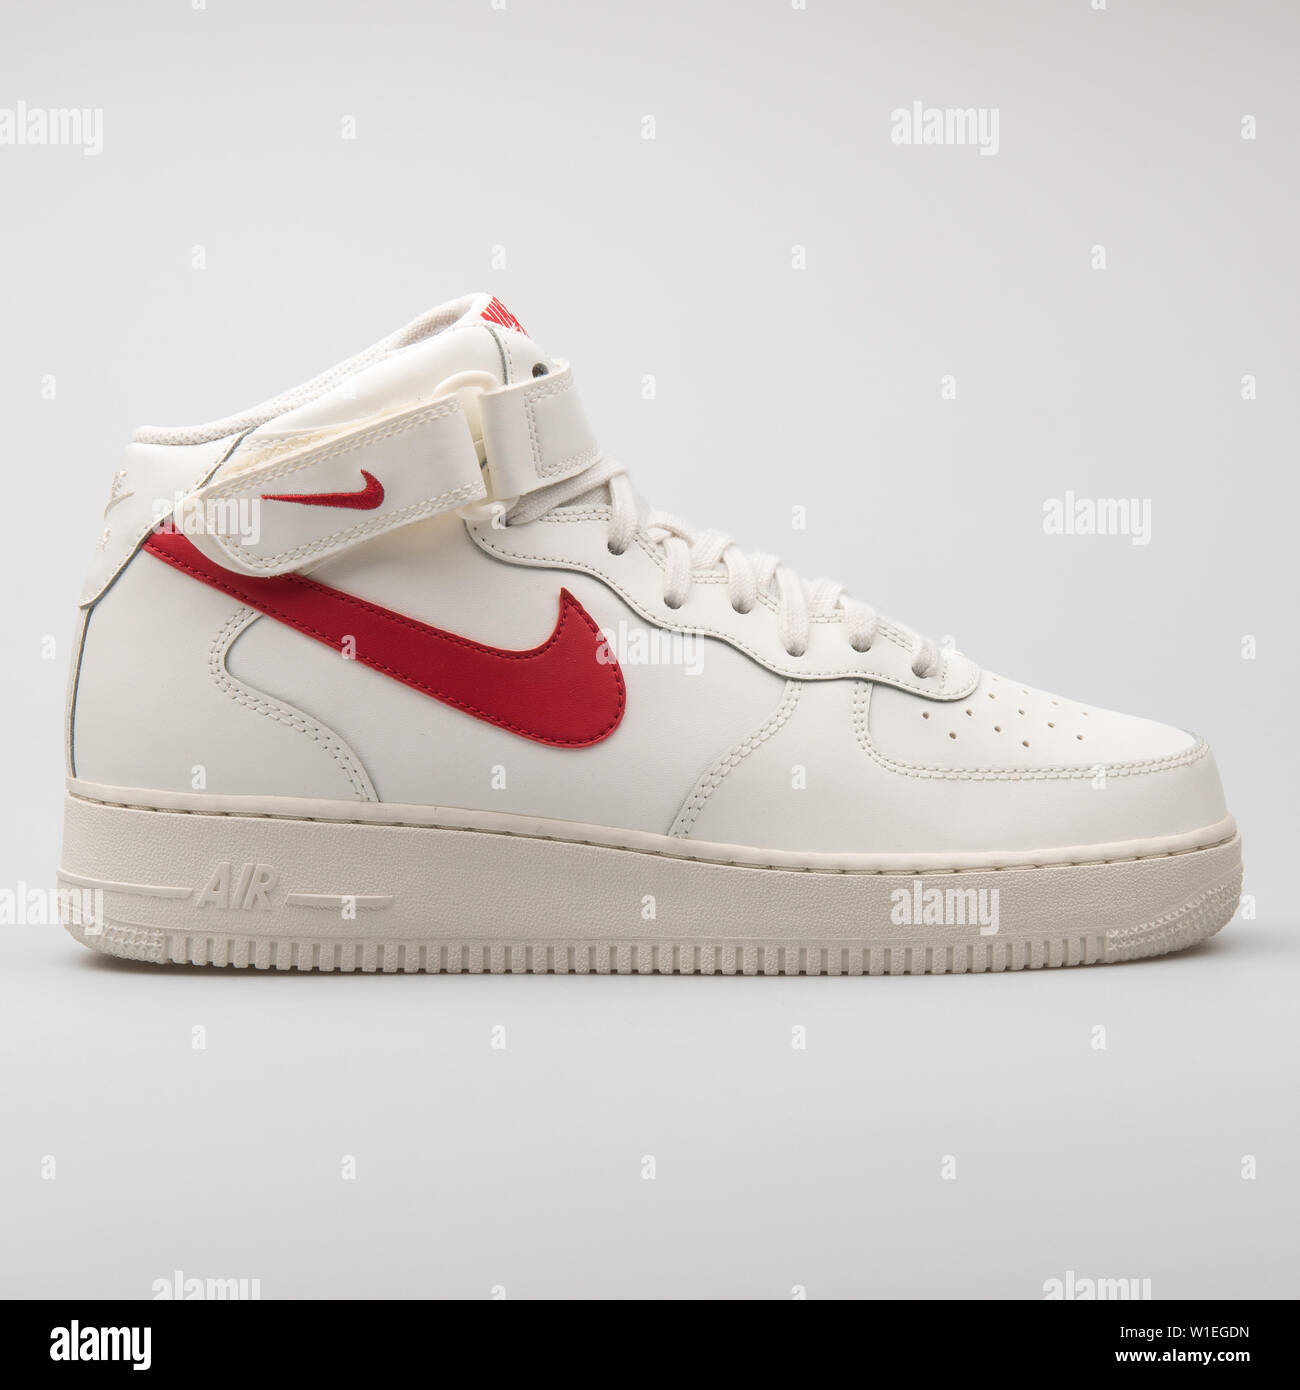 VIENNA, AUSTRIA - AUGUST 7, 2017: Nike Air Force 1 white and red sneaker on  white background Stock Photo - Alamy